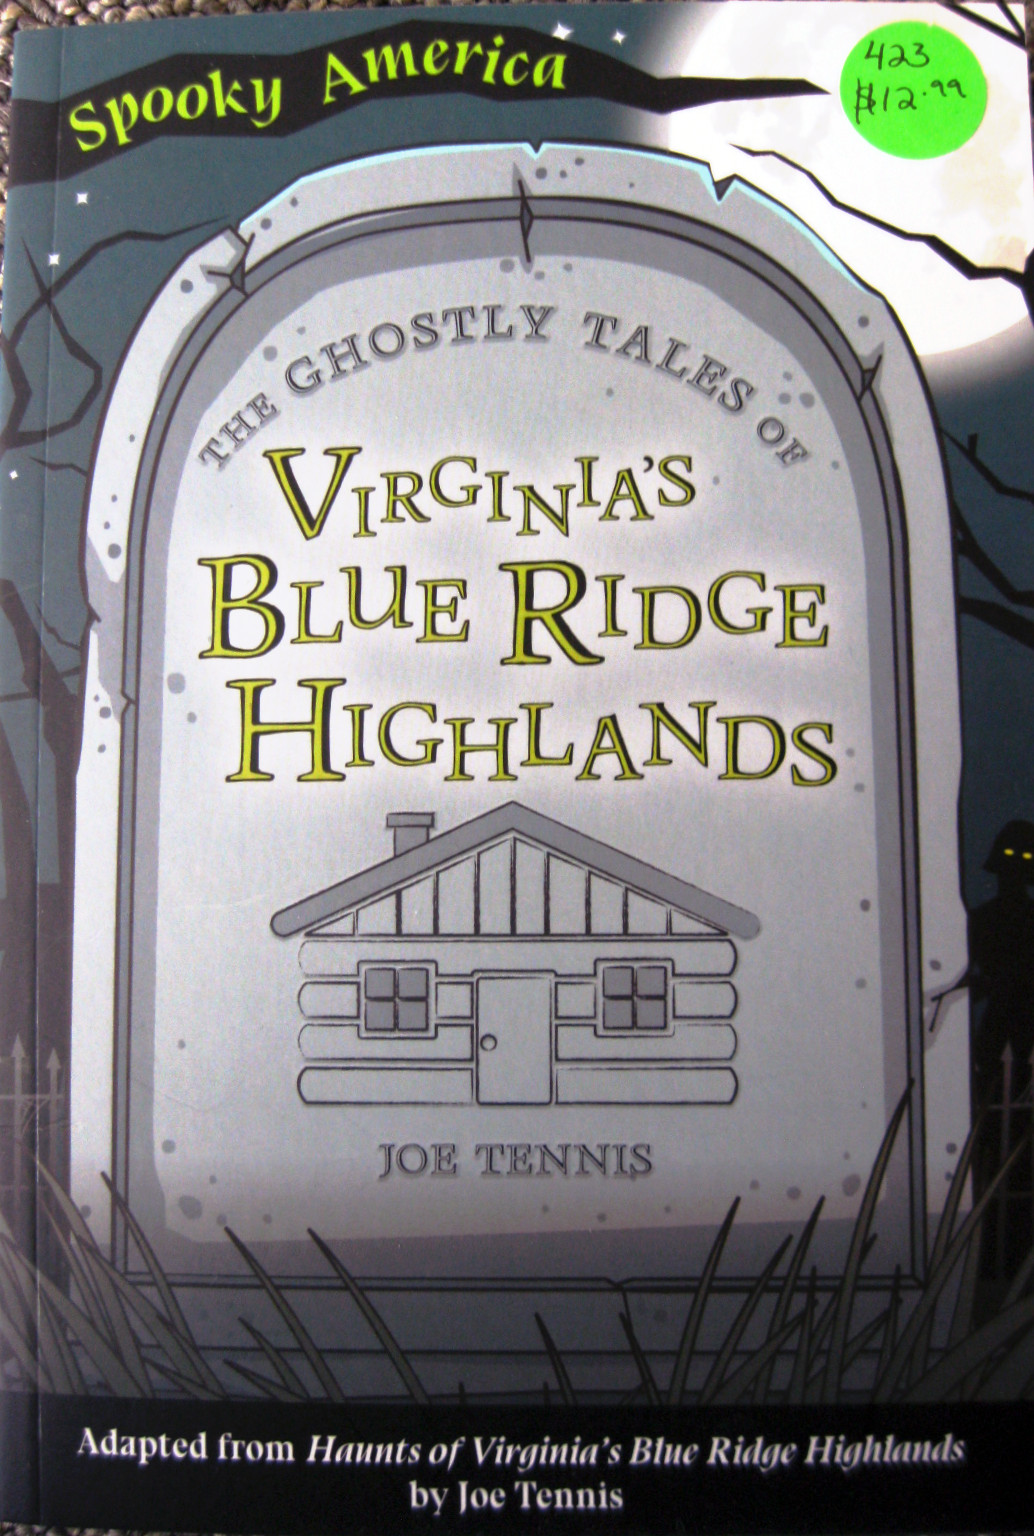 The Ghostly Tales of Virginia's Blue Ridge Highlands (Spooky America)